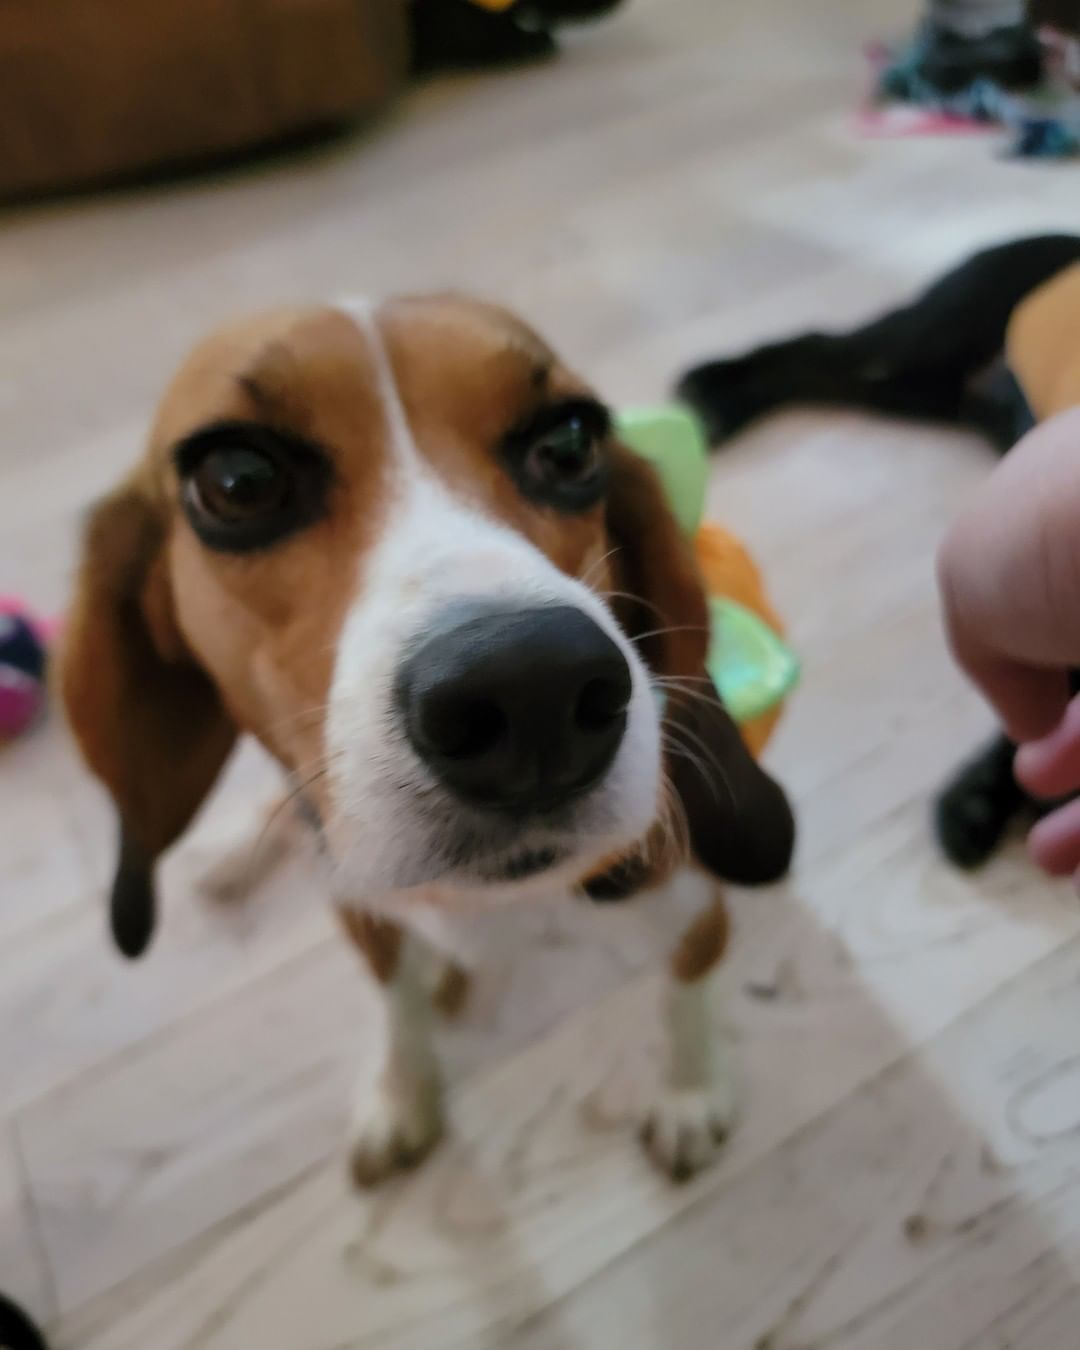 After 7 months with us this happy little beagle went to her furever home. Delilah came to us heartworm positive and with a broken pelvis. She has since healed and is doing amazing. Congrats baby girl and have an amazing life!